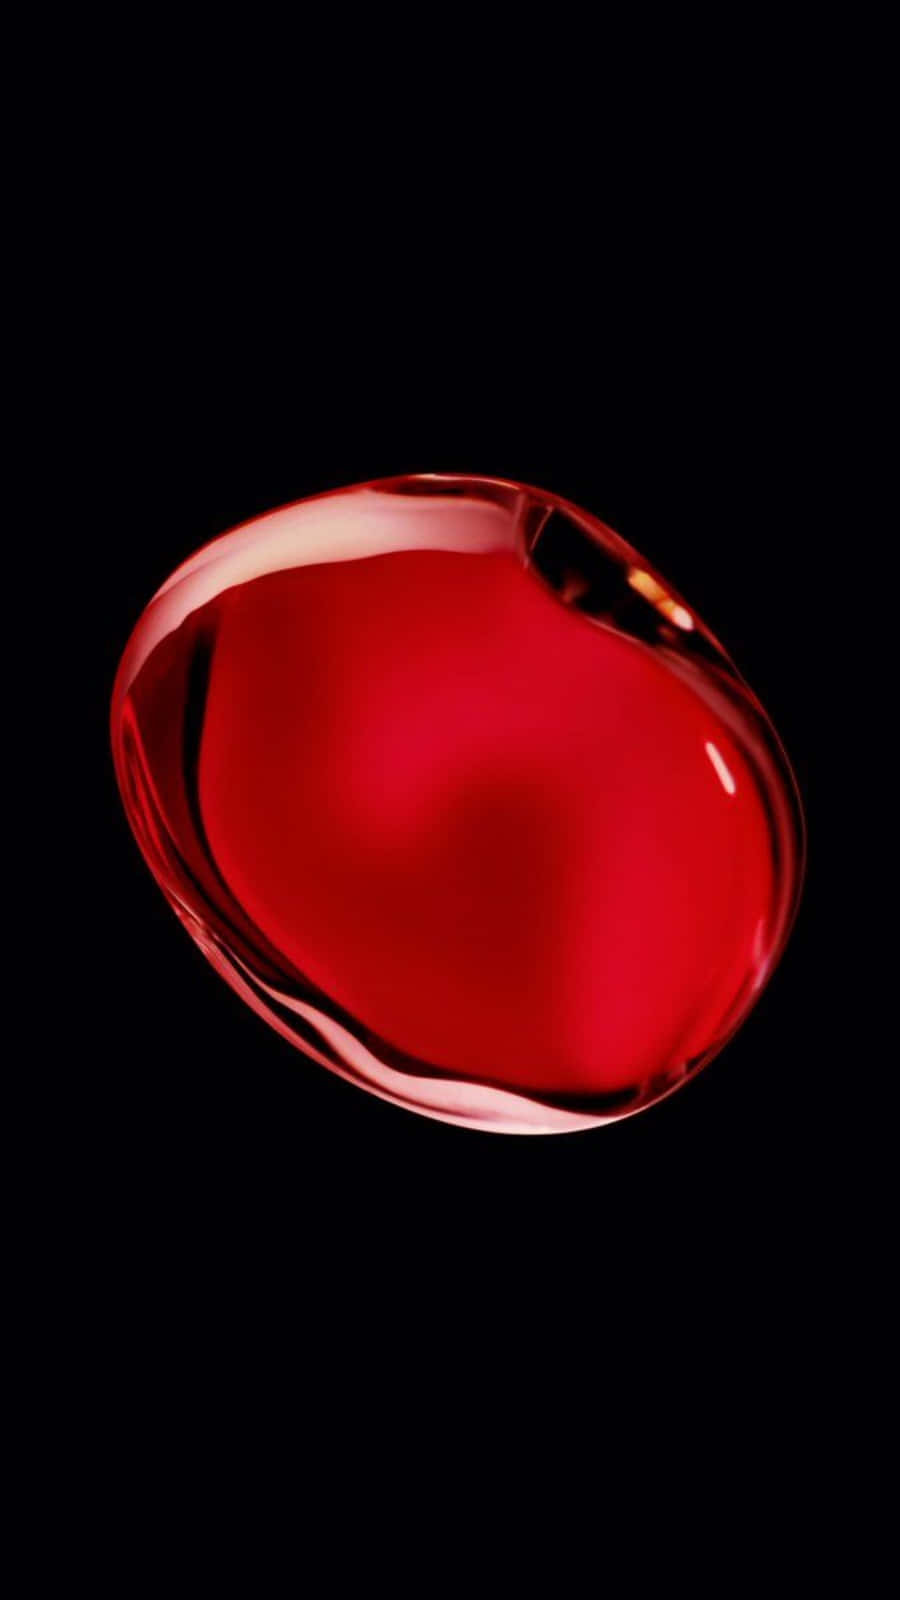 A Red Liquid On A Black Background Wallpaper